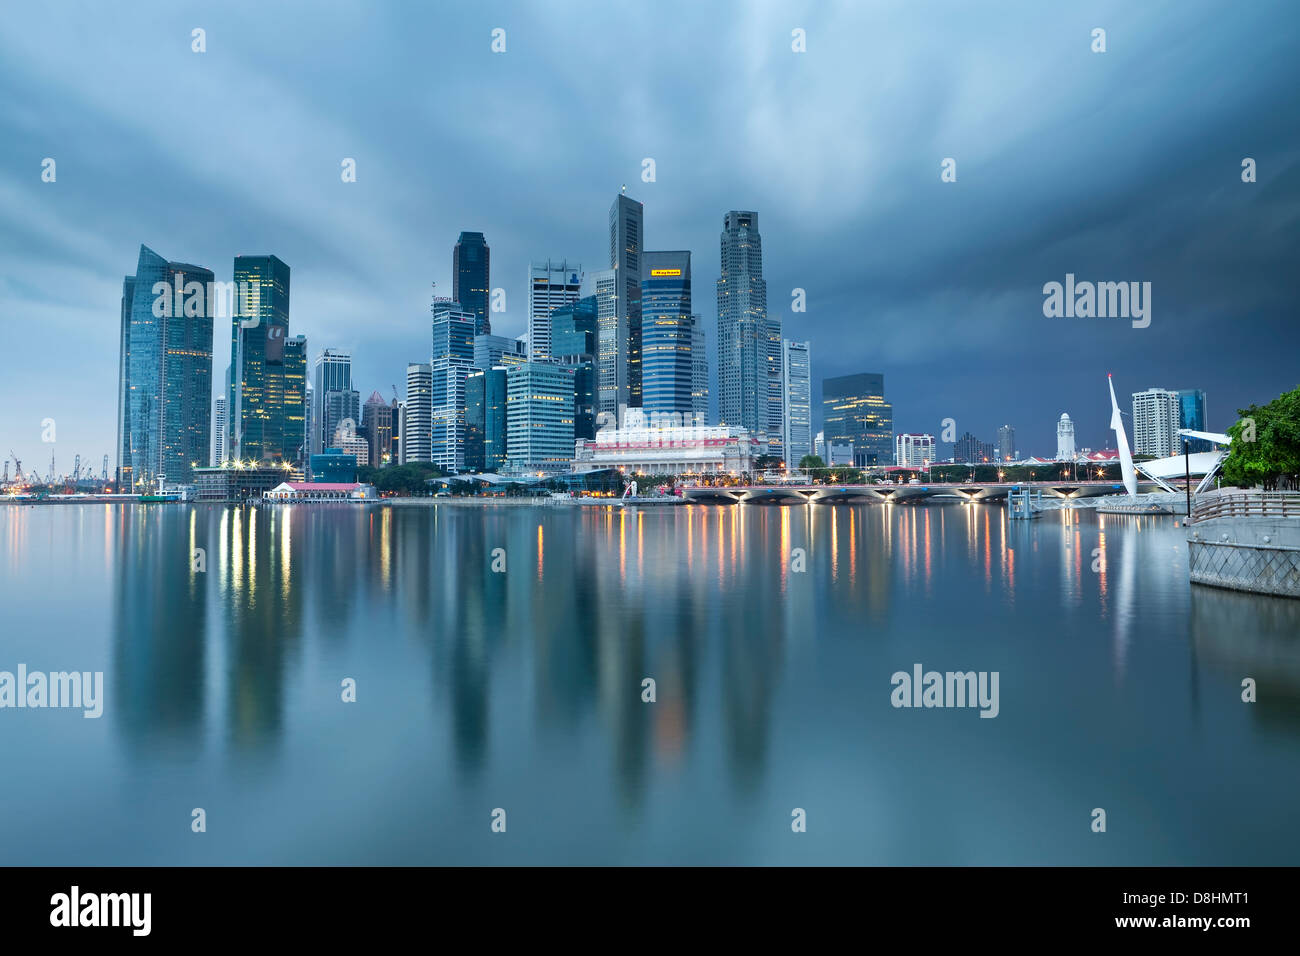 Asia, Singapore, Singapore Skyline and Financial district under gathering storm clouds Stock Photo